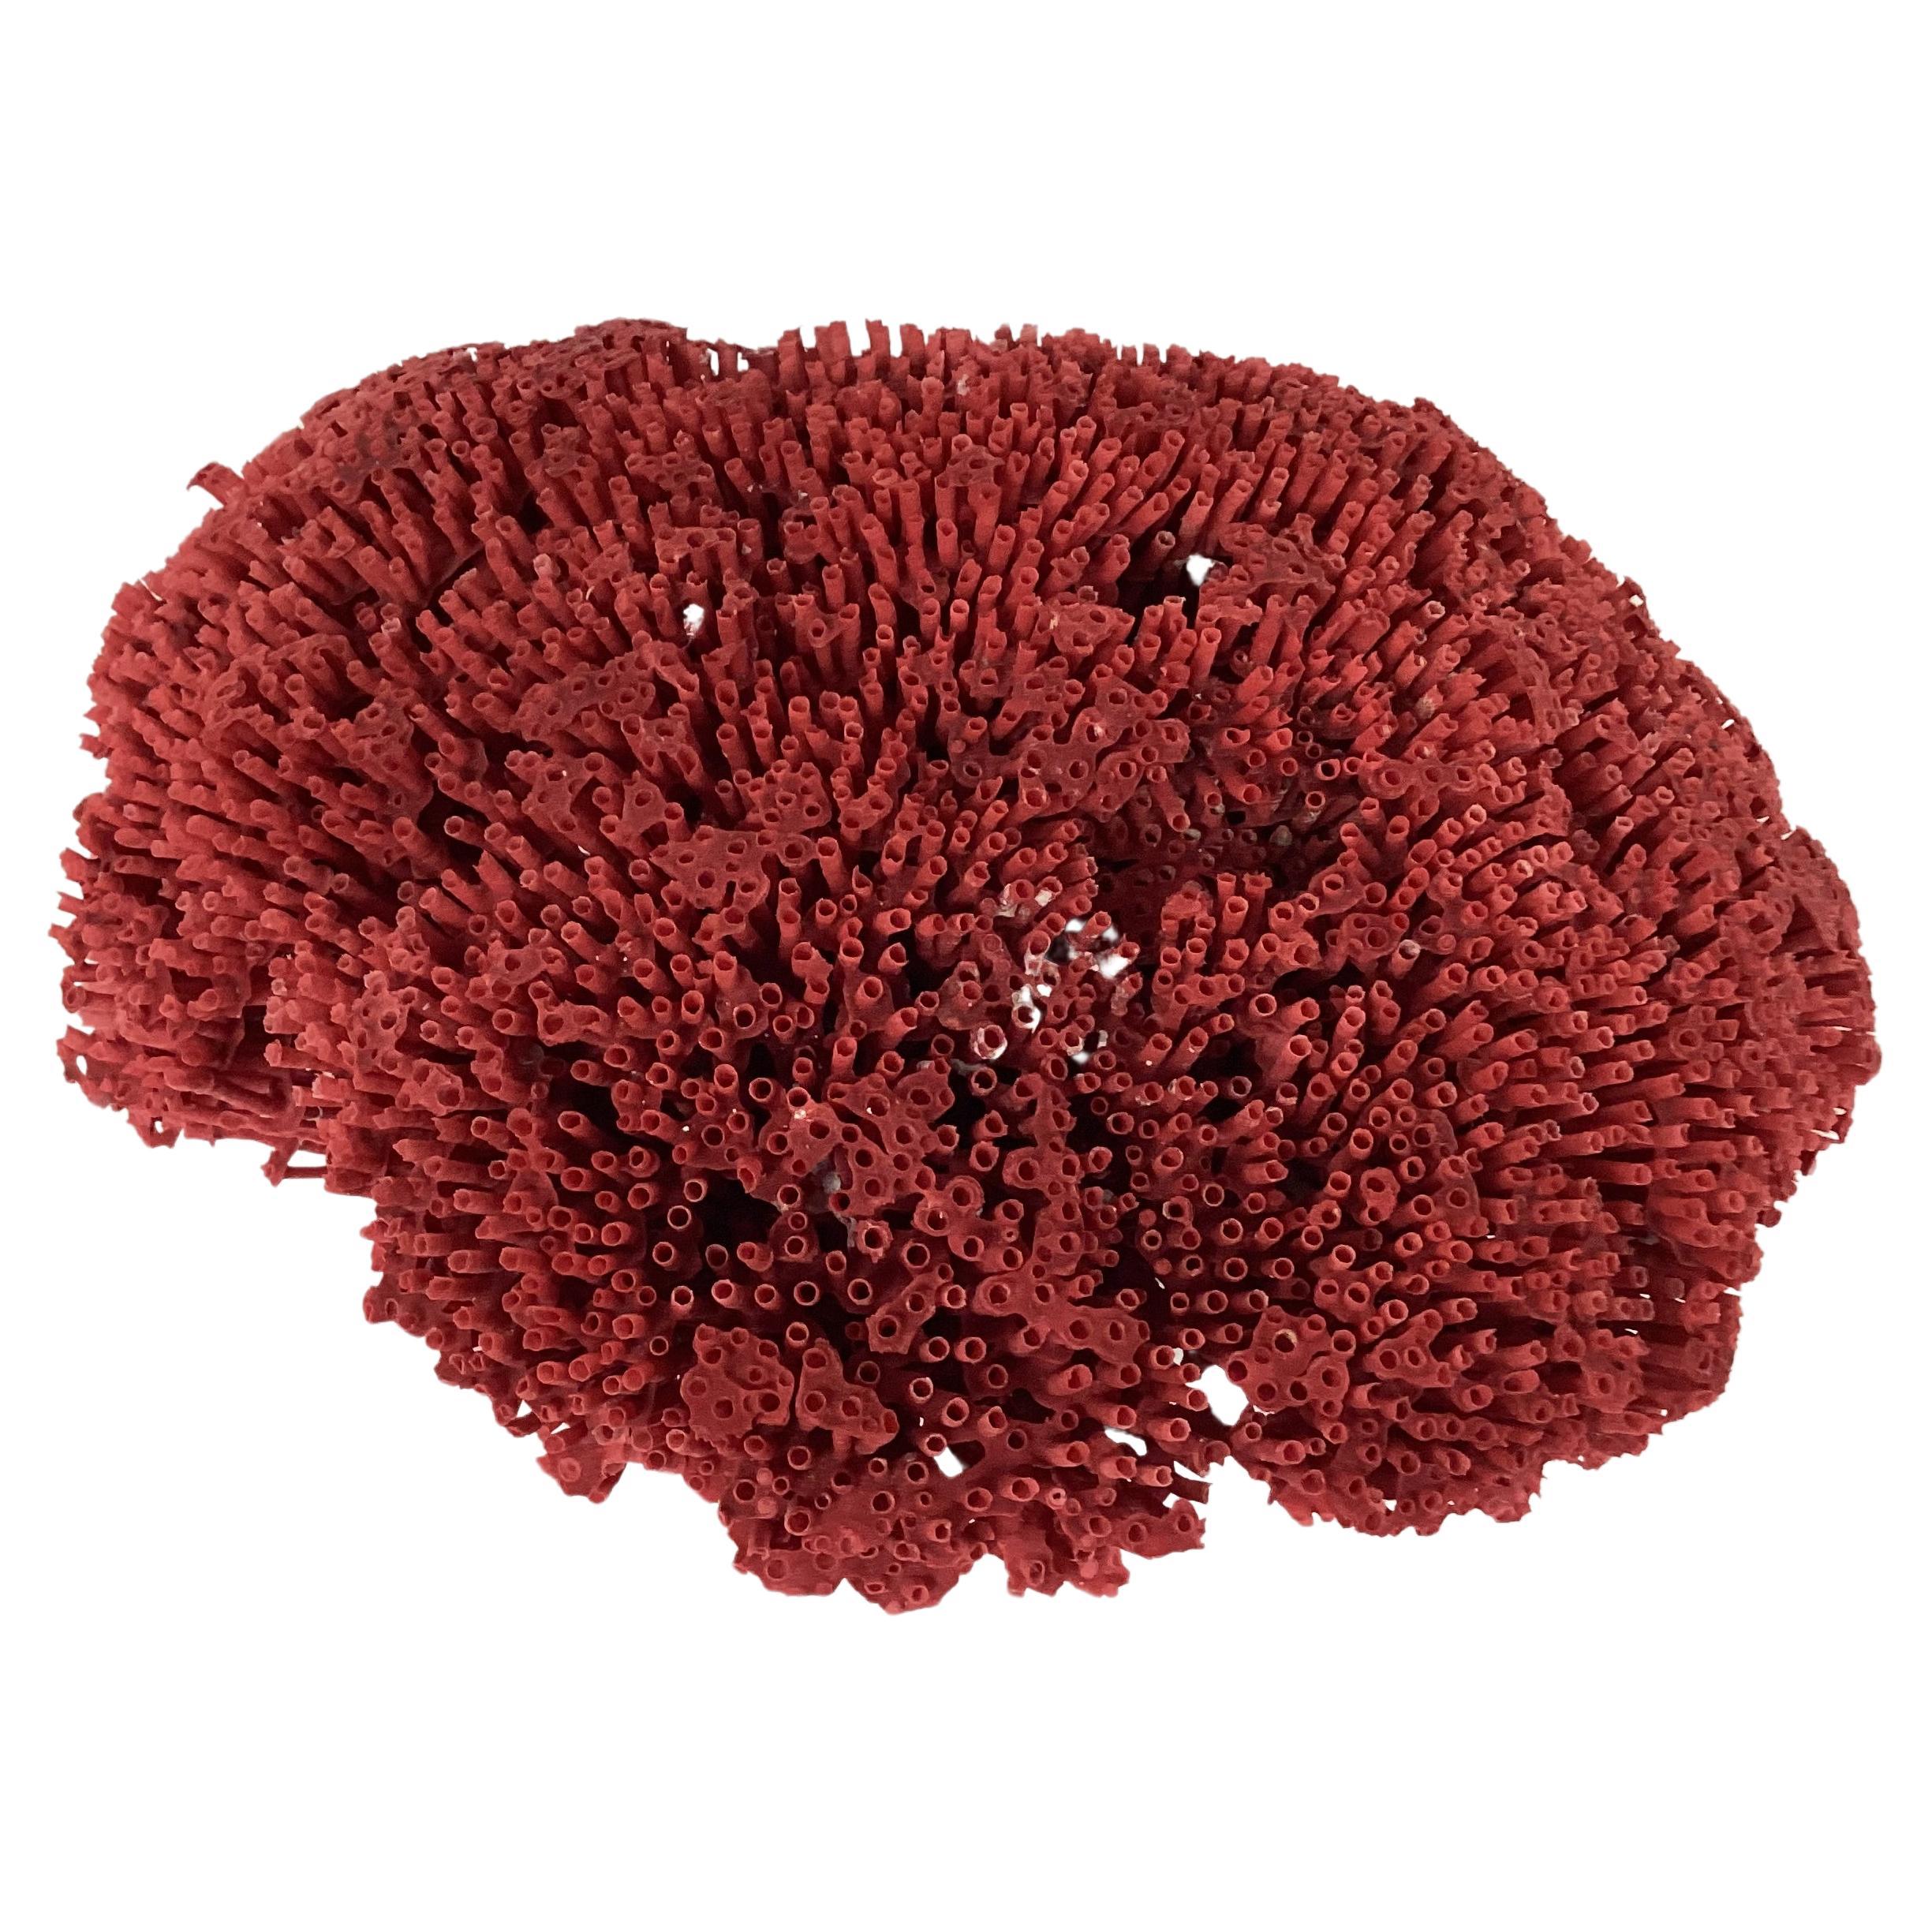 Natural specimen of red coral reef. Color is a natural ruby red Flat underside for easy display. This specimen is a great size for displaying in any decor.